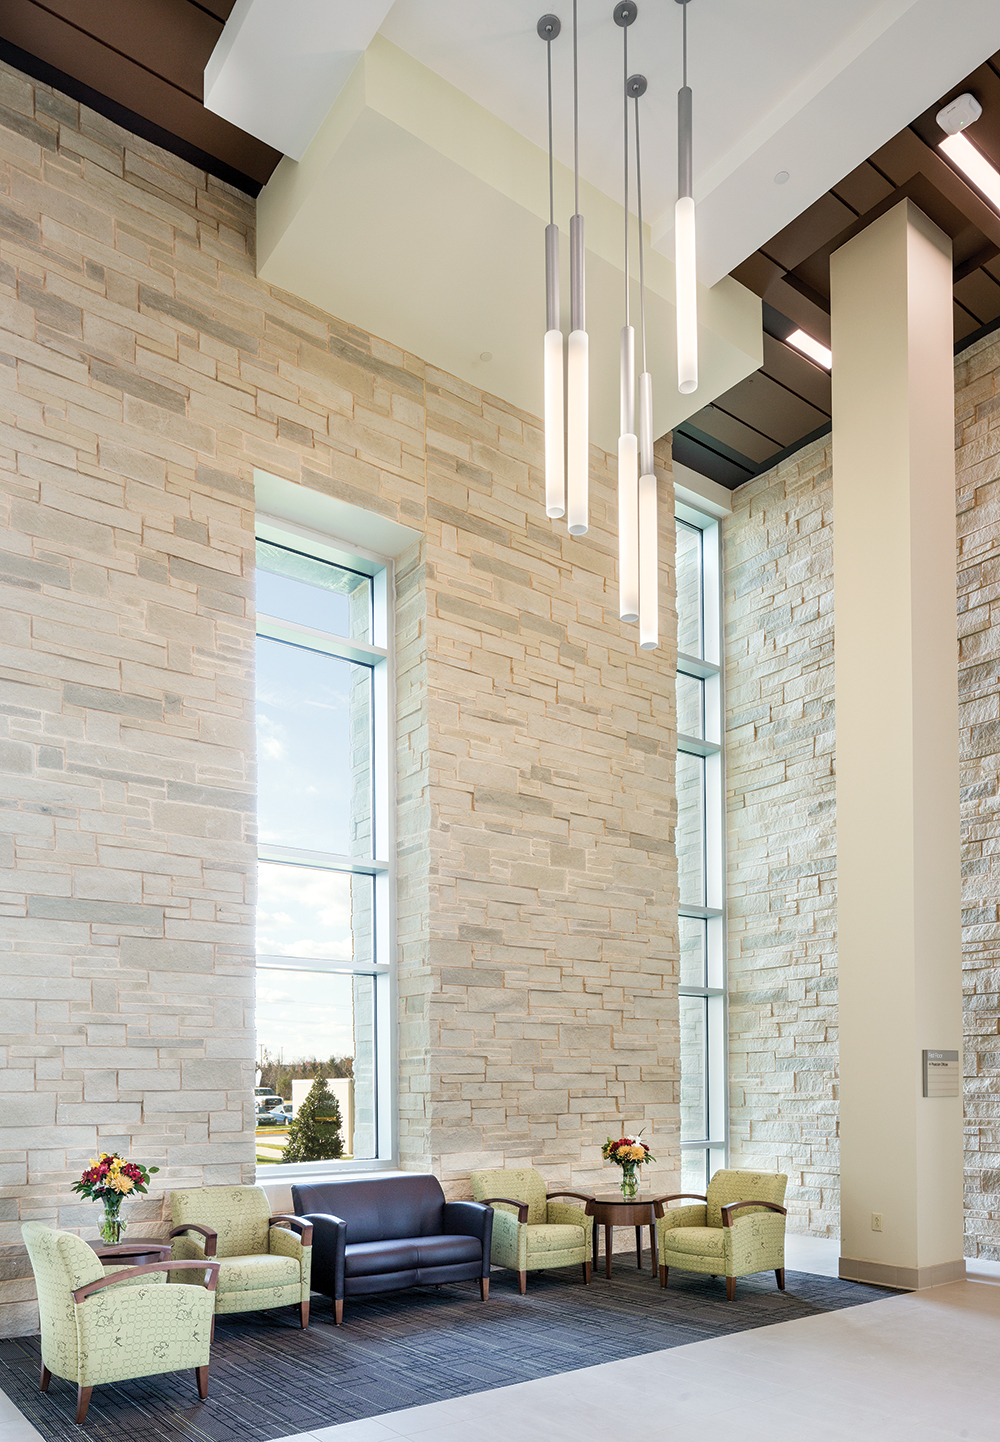 Sequence pendants highlight a clean, comforting healthcare design in a large waiting area with stone walls and green furniture.